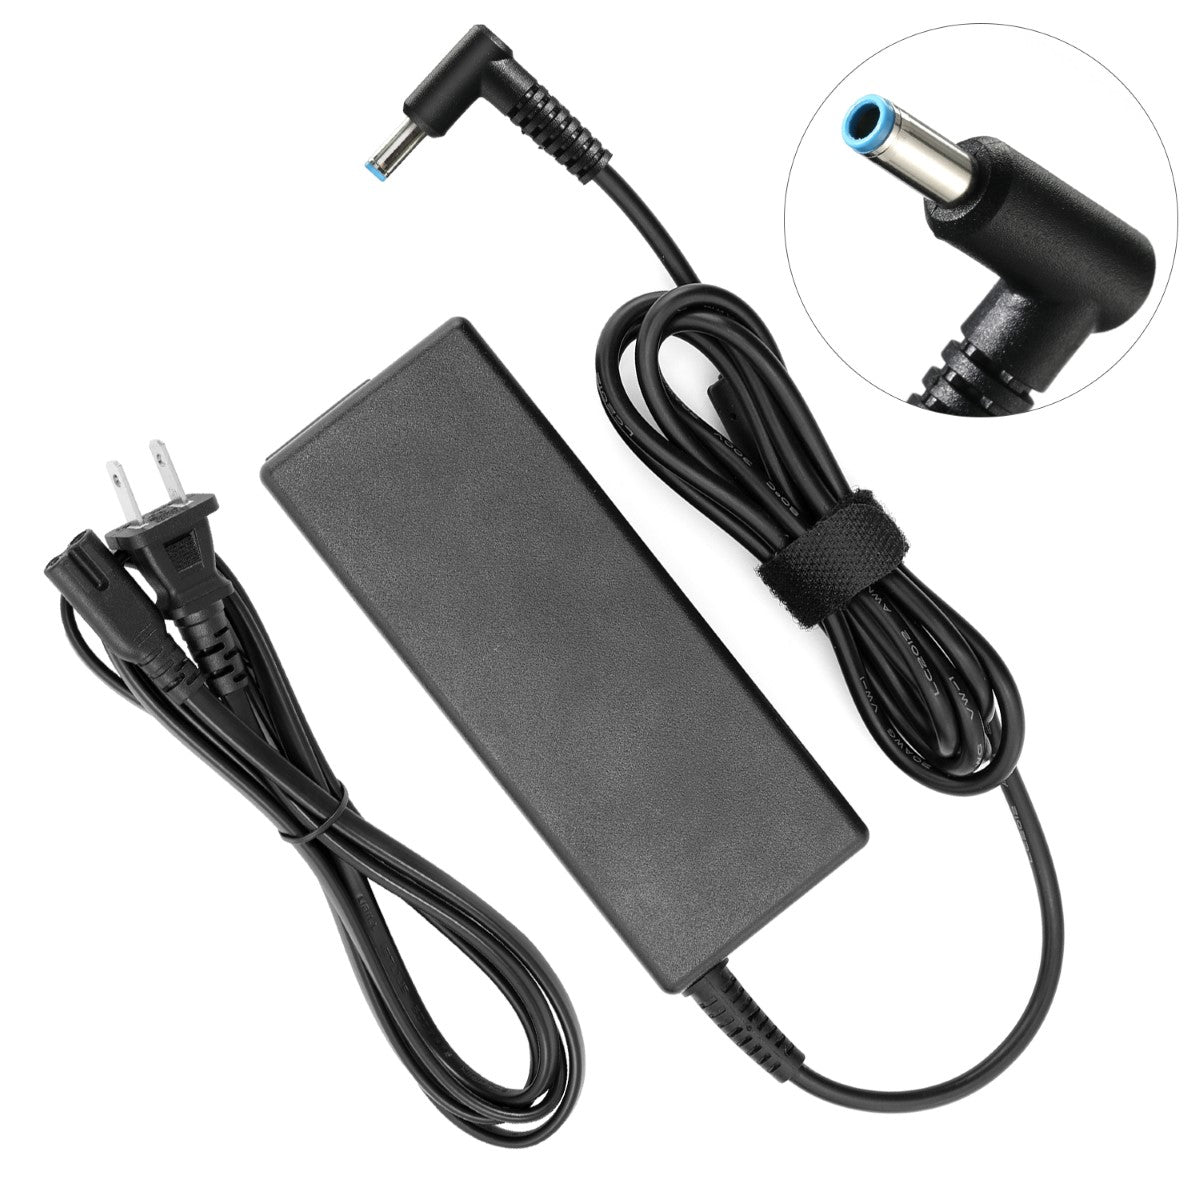 AC Adapter Charger for HP Chromebook 14-ak020nr Notebook.